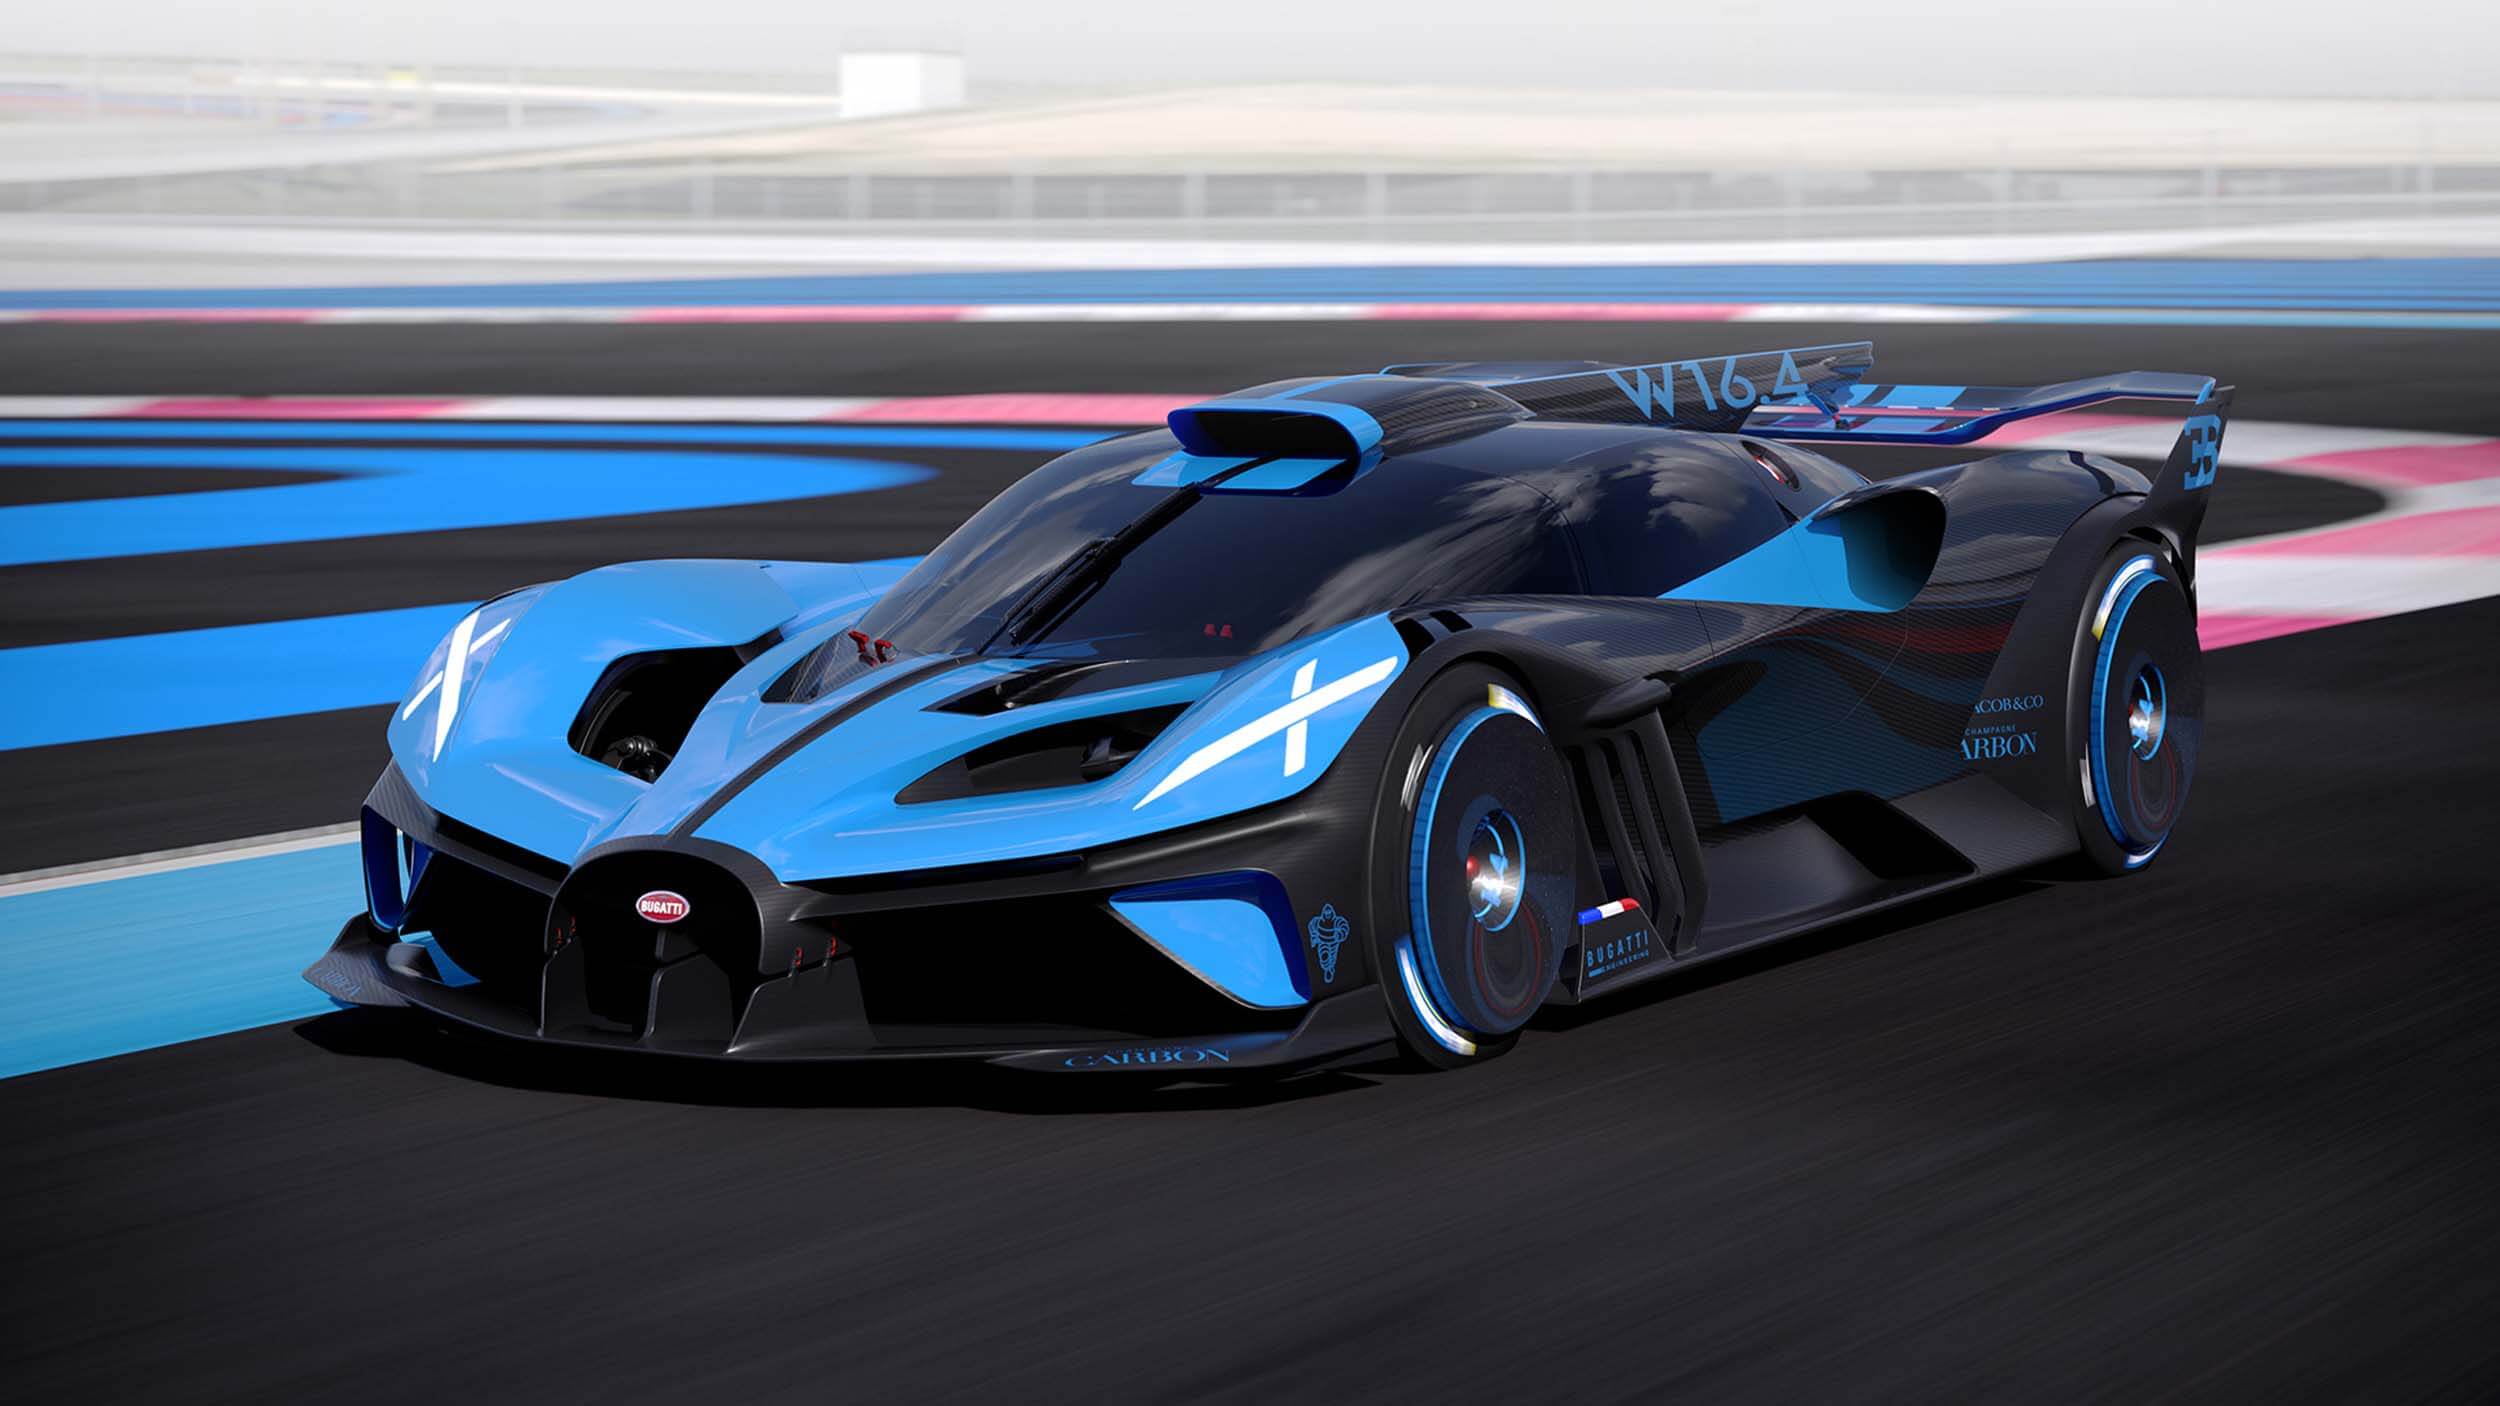 A render of the track-only Bugatti Bolide race car powered by a next-gen W16 engine and wearing the livery the Bugatti Tank wore at Le Mans.